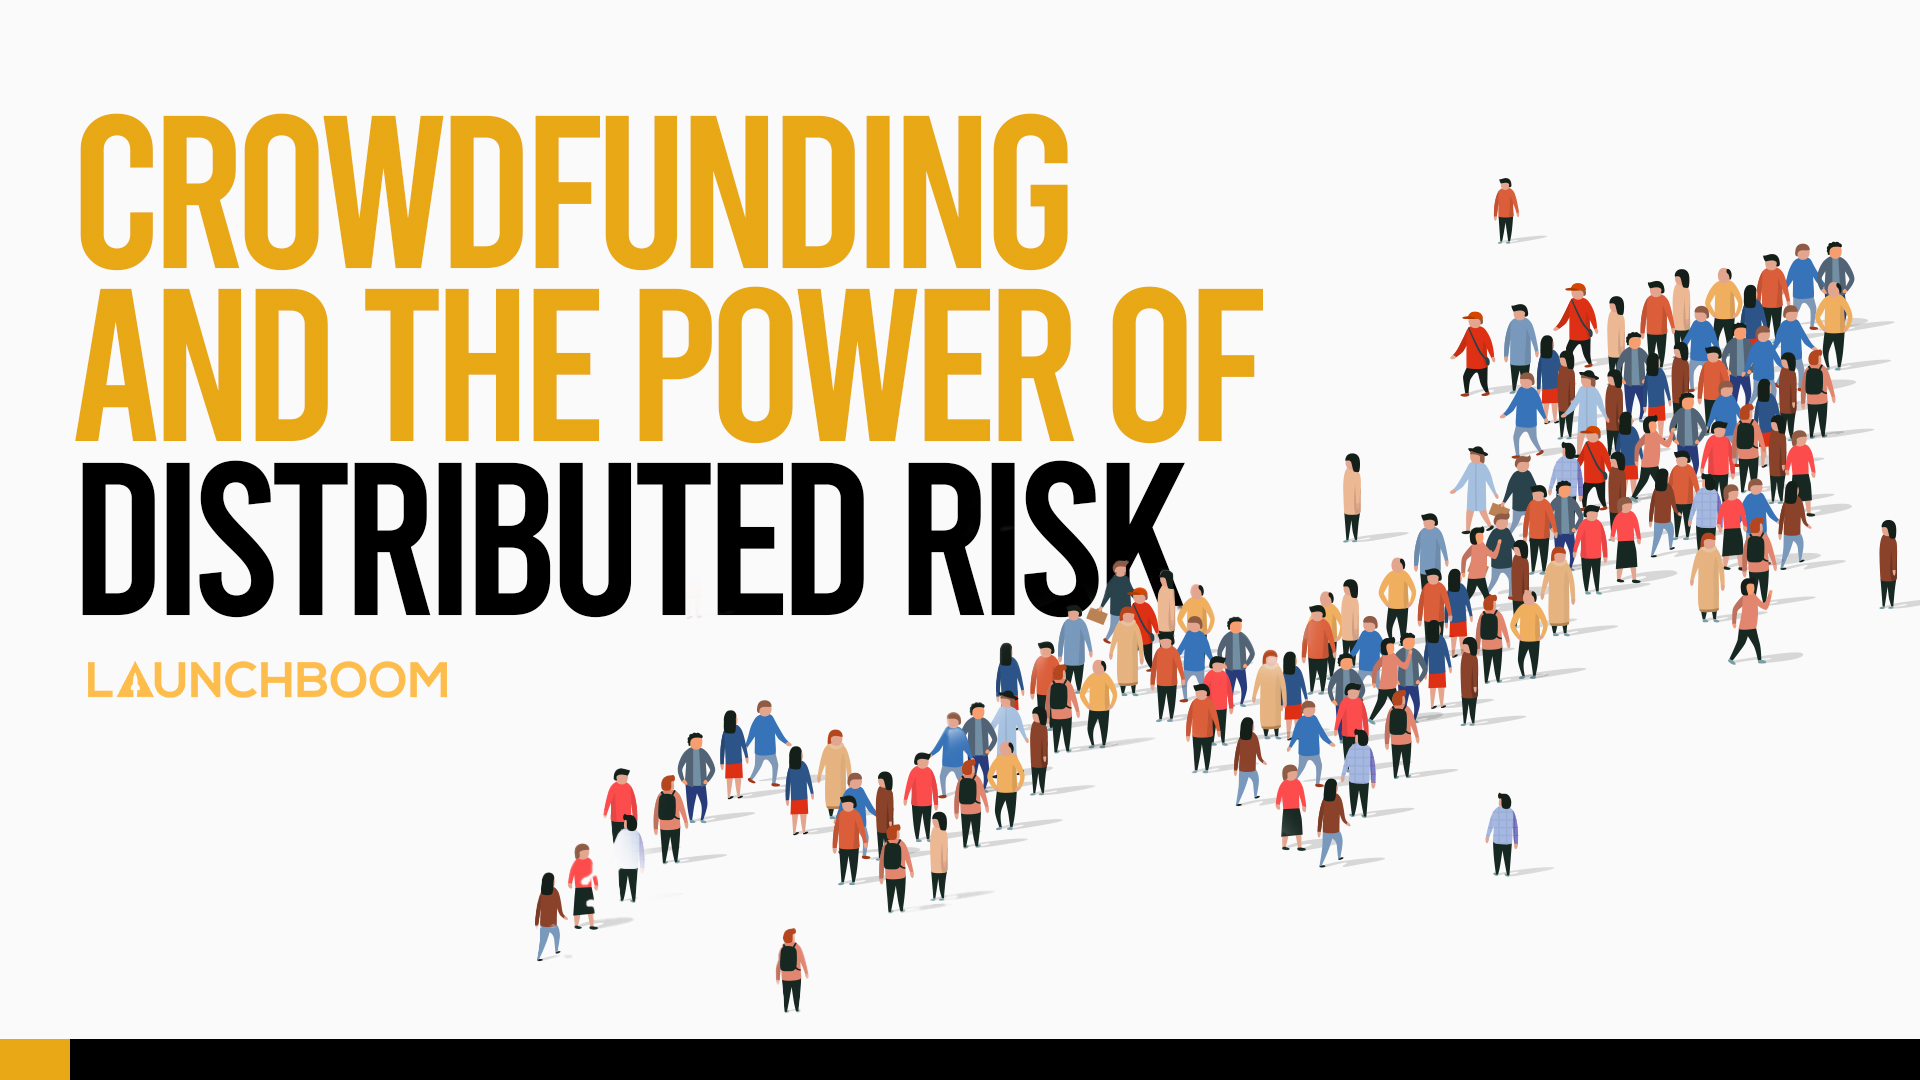 Crowdfunding and the power of distributed risk